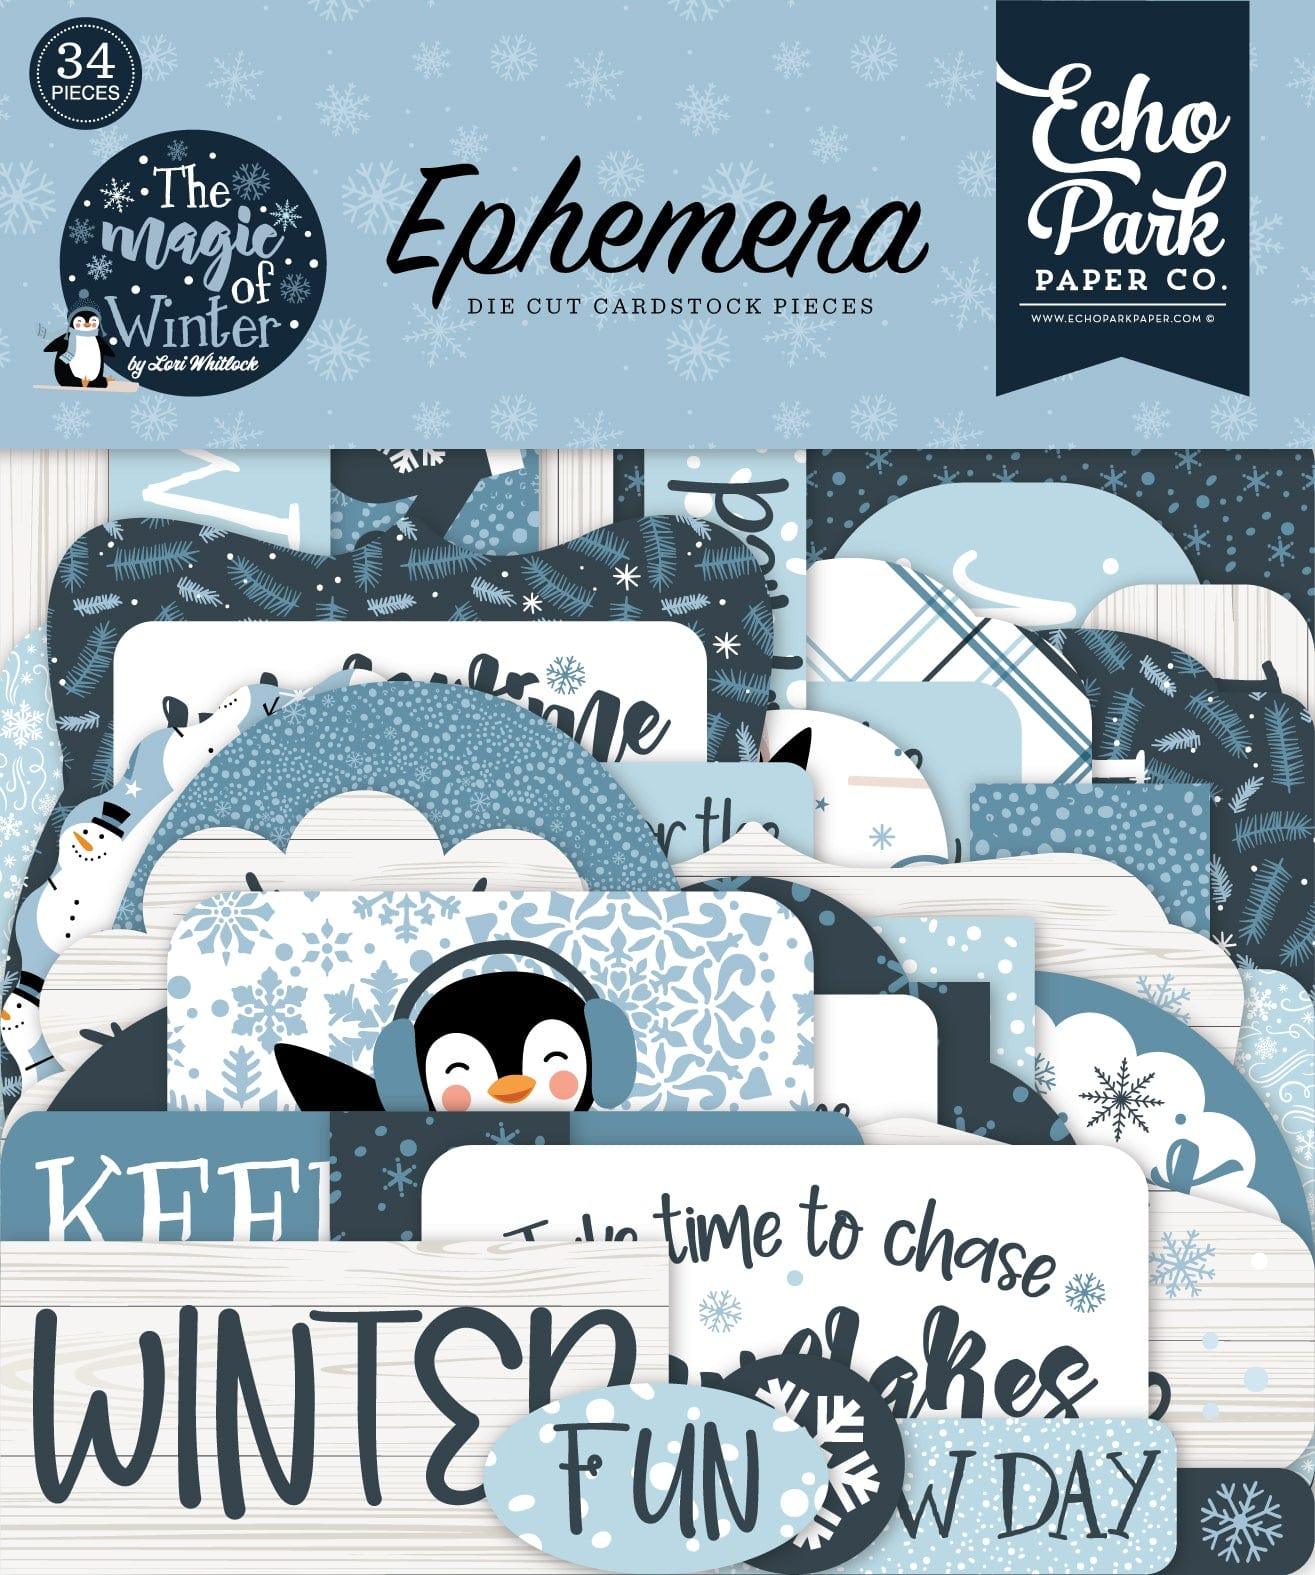 The Magic of Winter Collection 5 x 5 Scrapbook Ephemera Die Cuts by Echo Park Paper - Scrapbook Supply Companies